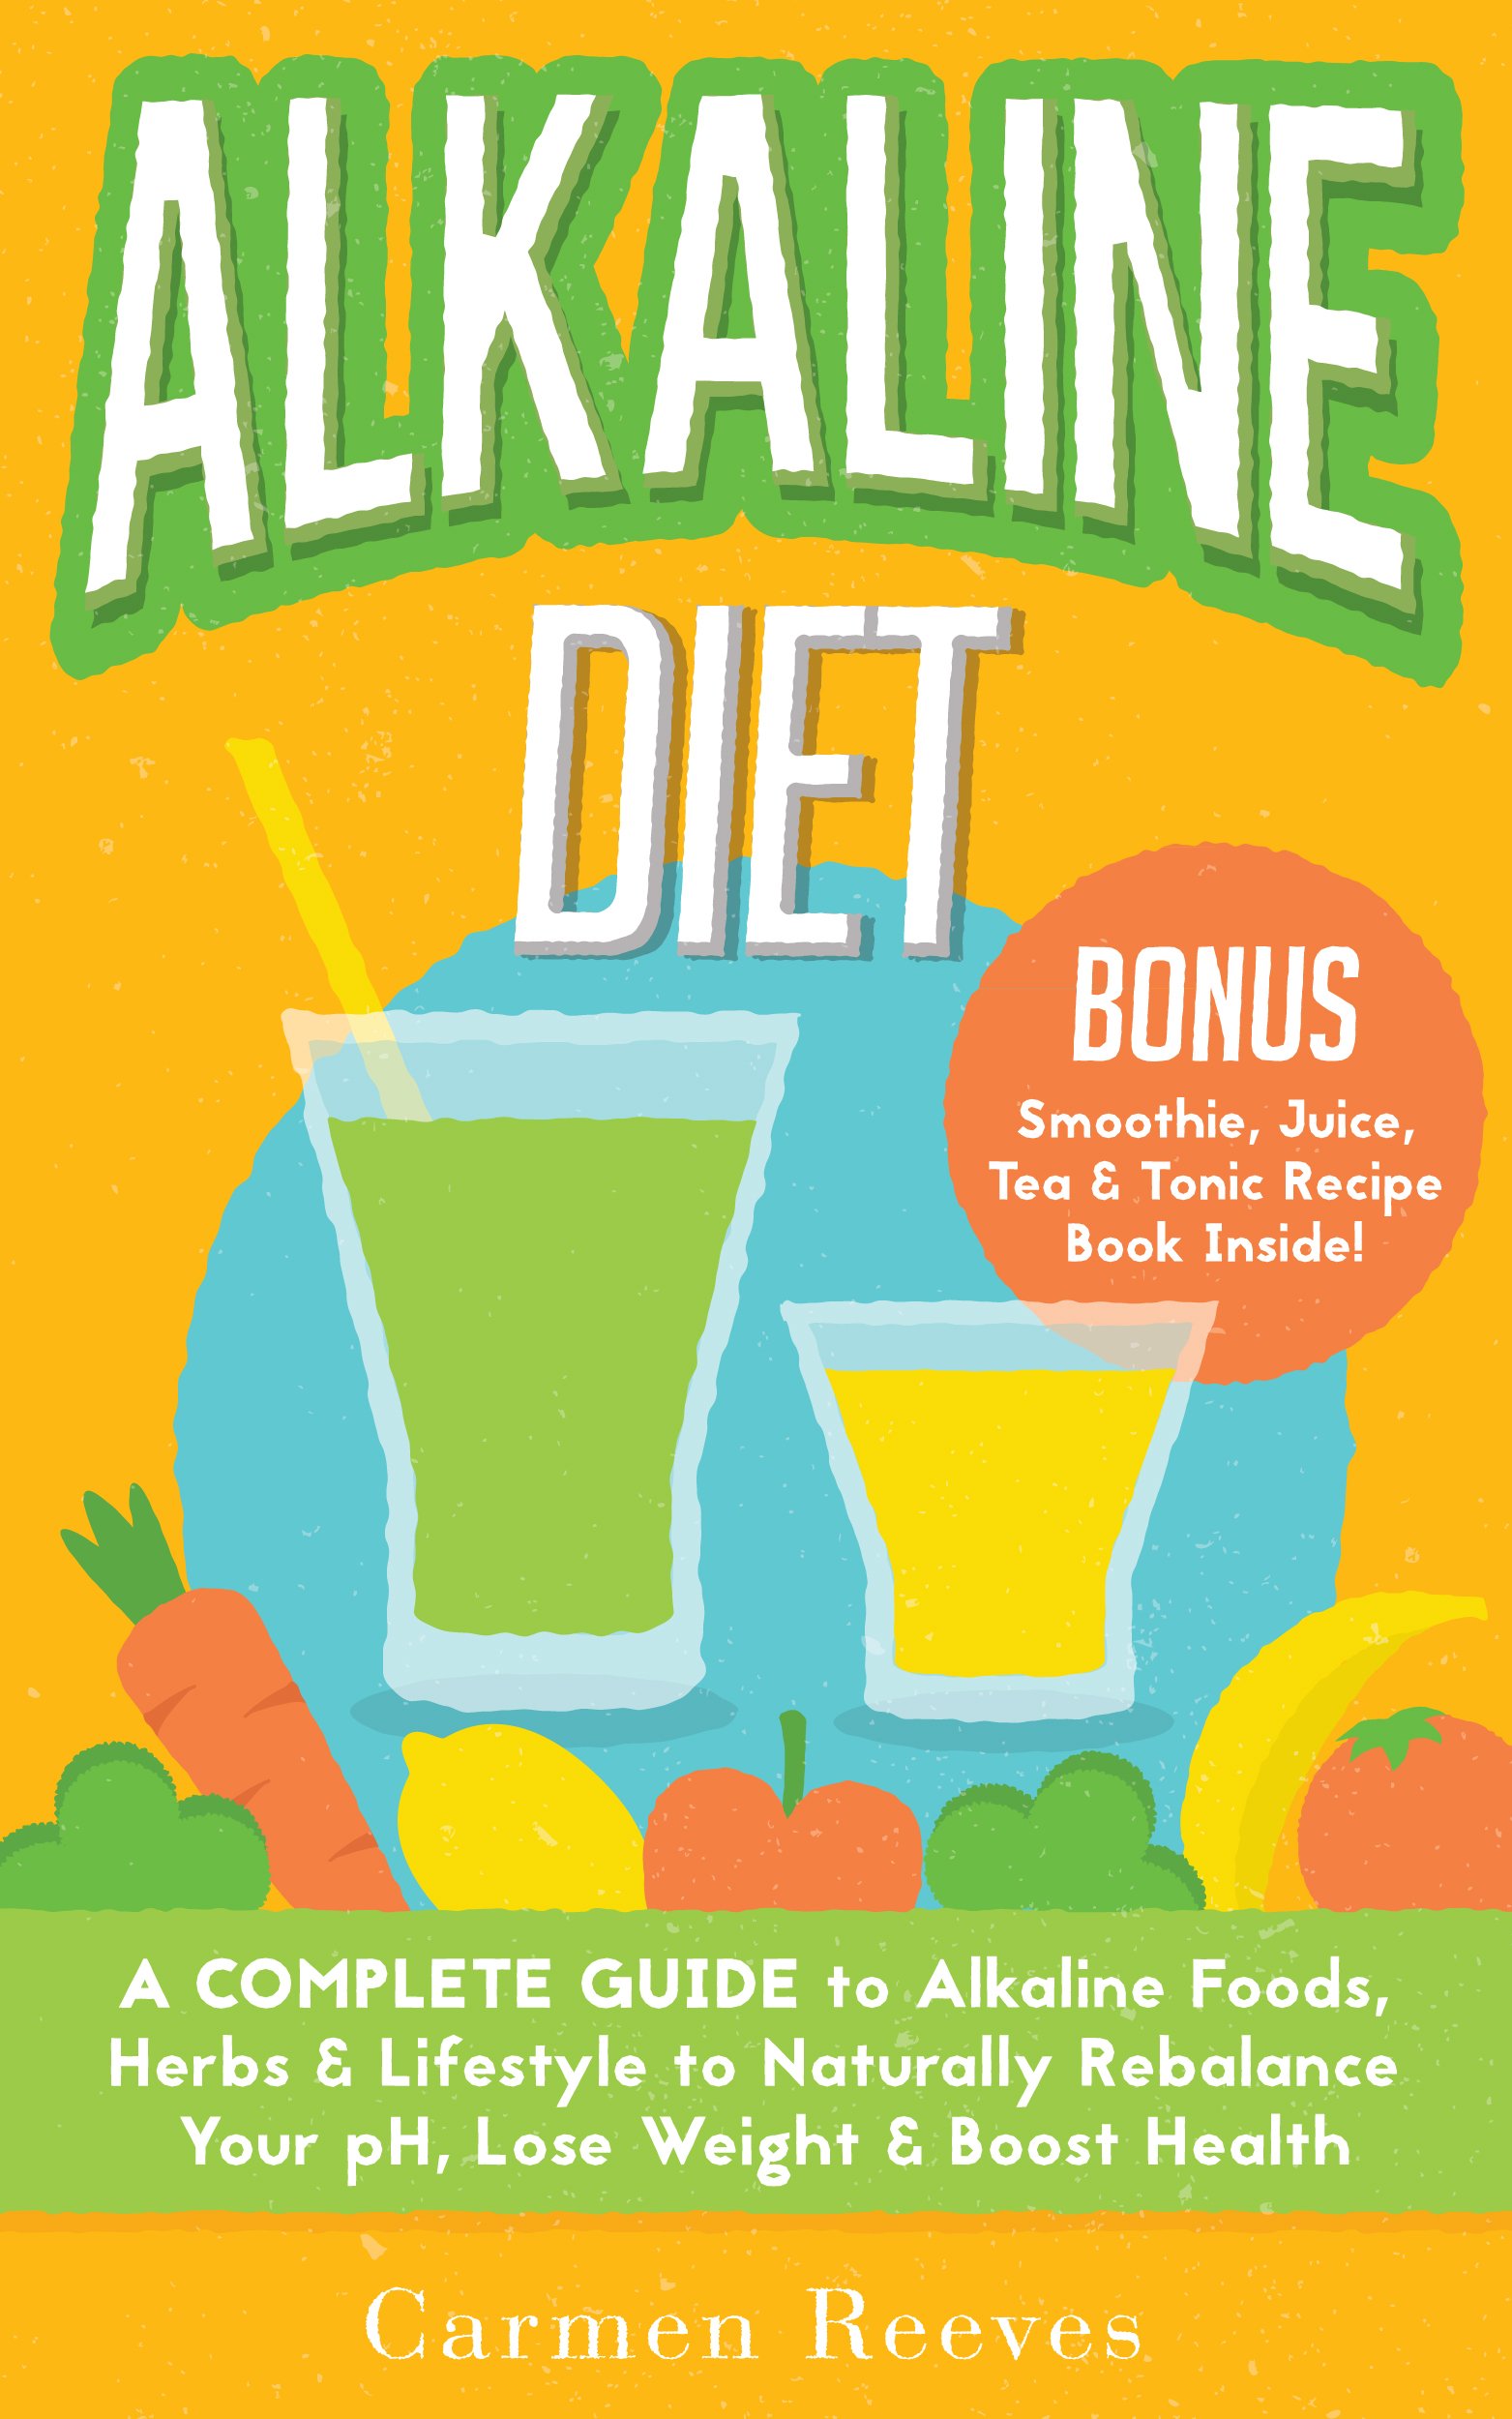 ALKALINE DIET: A Complete Guide to Alkaline Foods, Herbs & Lifestyle to Naturally Rebalance Your pH, Lose Weight & Boost Health (BONUS Alkalizing Smoothie, Juice, Tea & Tonic Recipe Book)